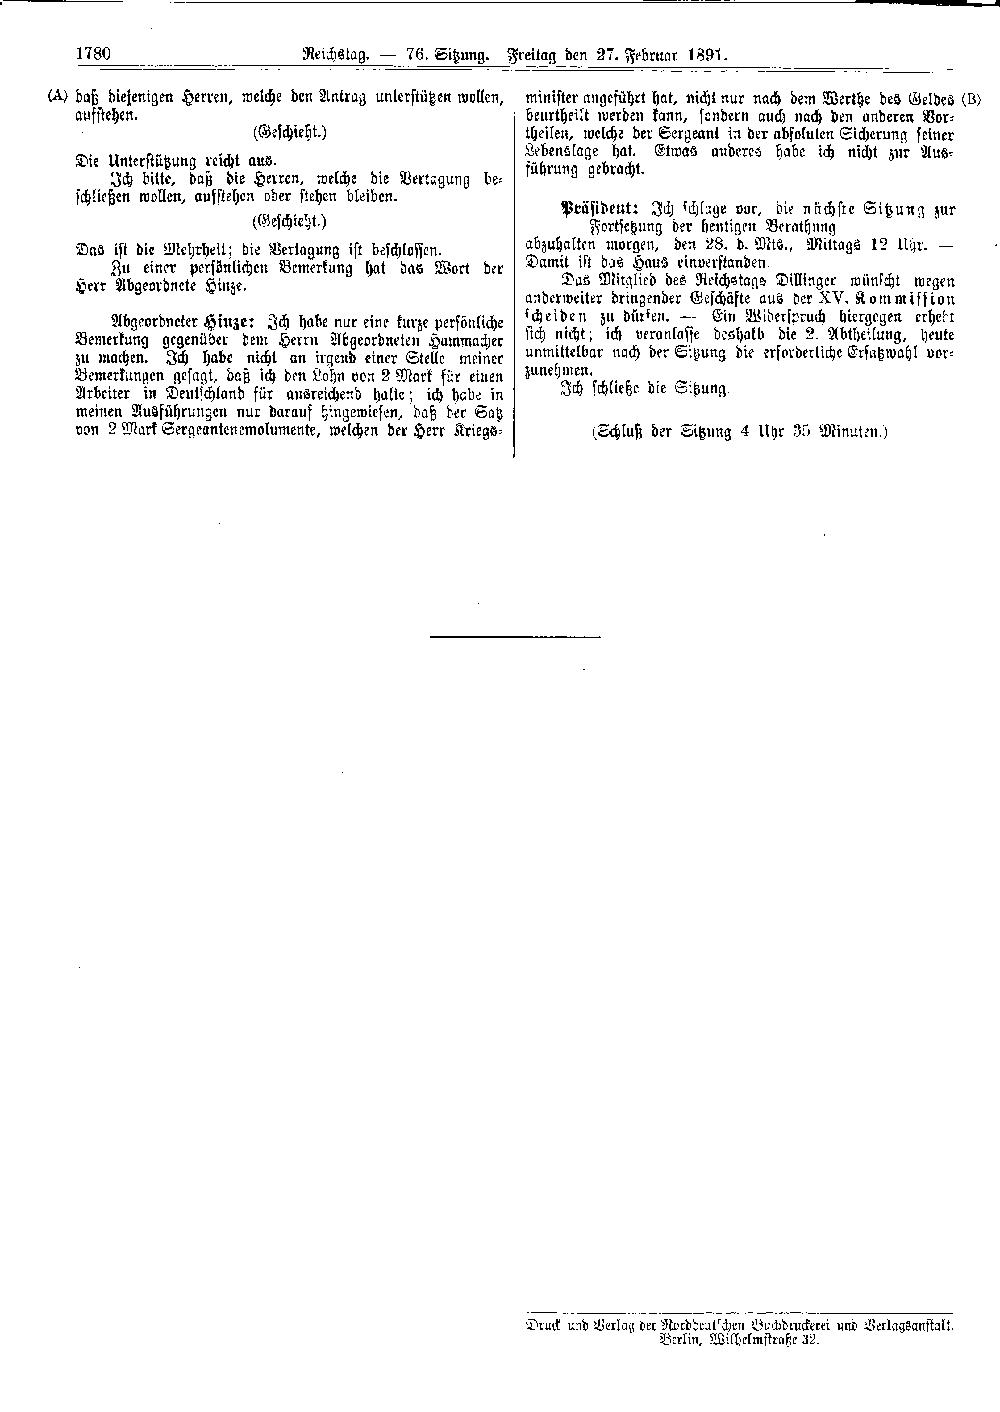 Scan of page 1780